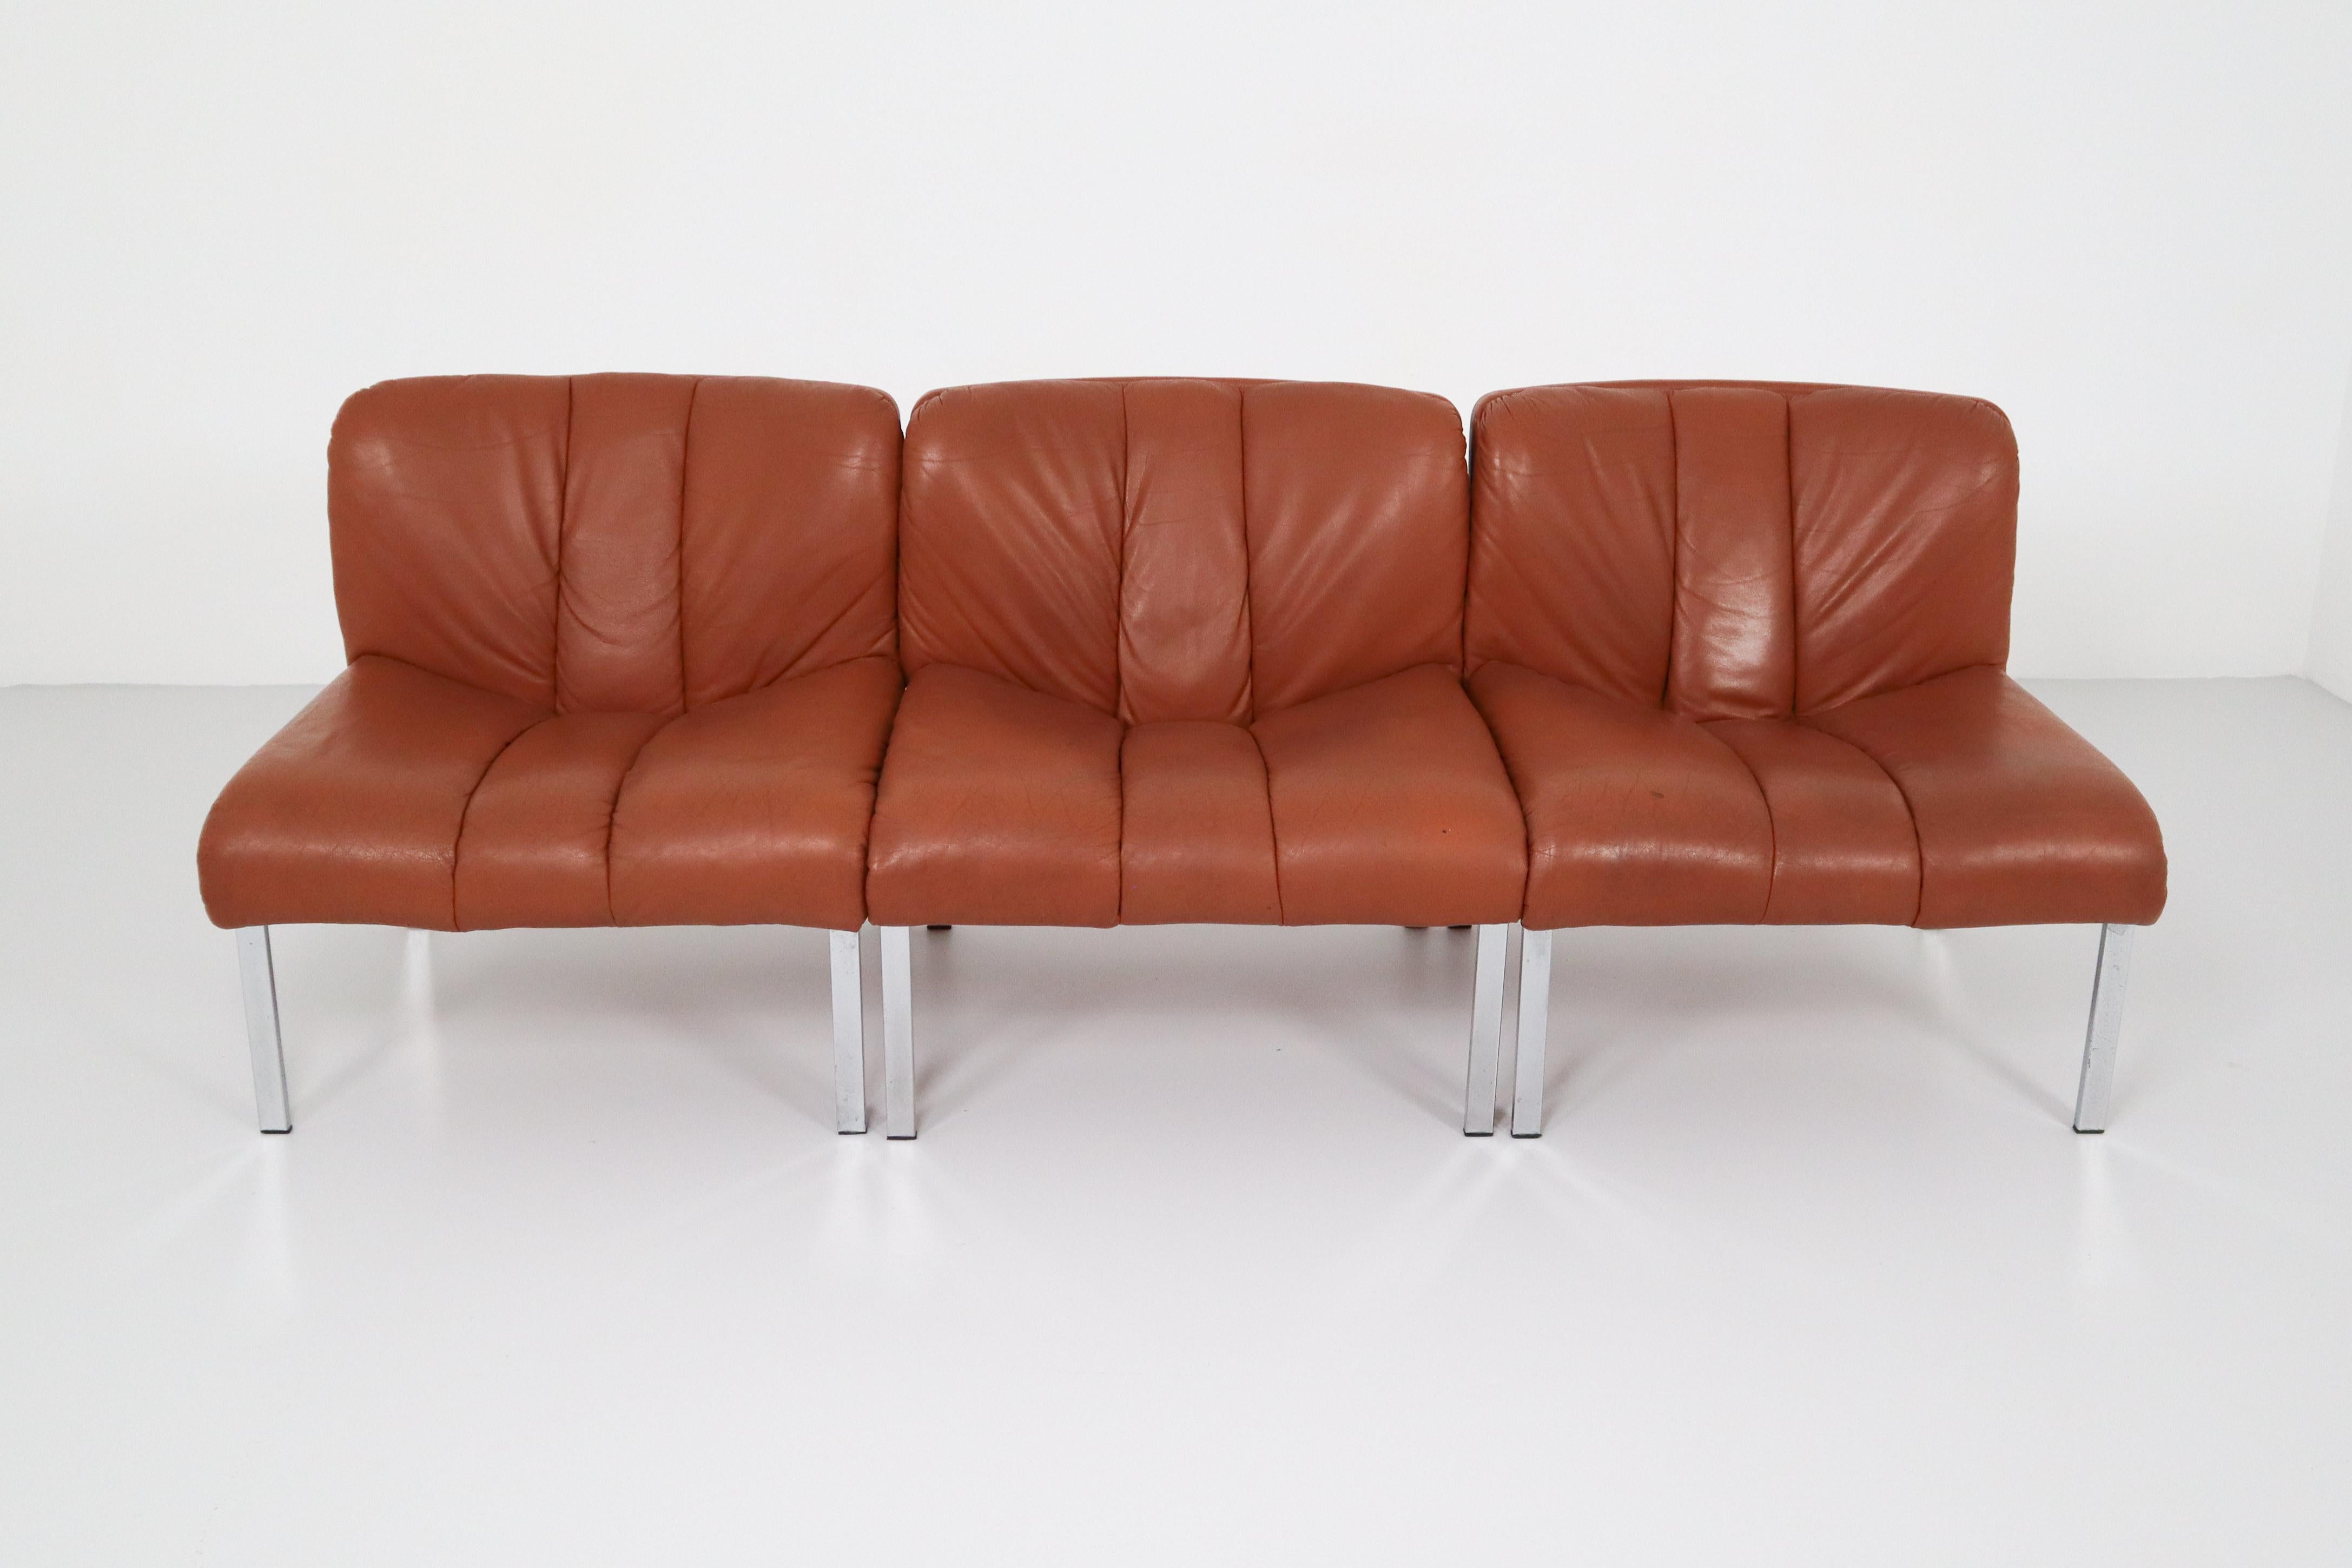 20th Century Set of Three Chairs, Sofa in Cognac Leather by Girsberger, Switzerland, 1970s